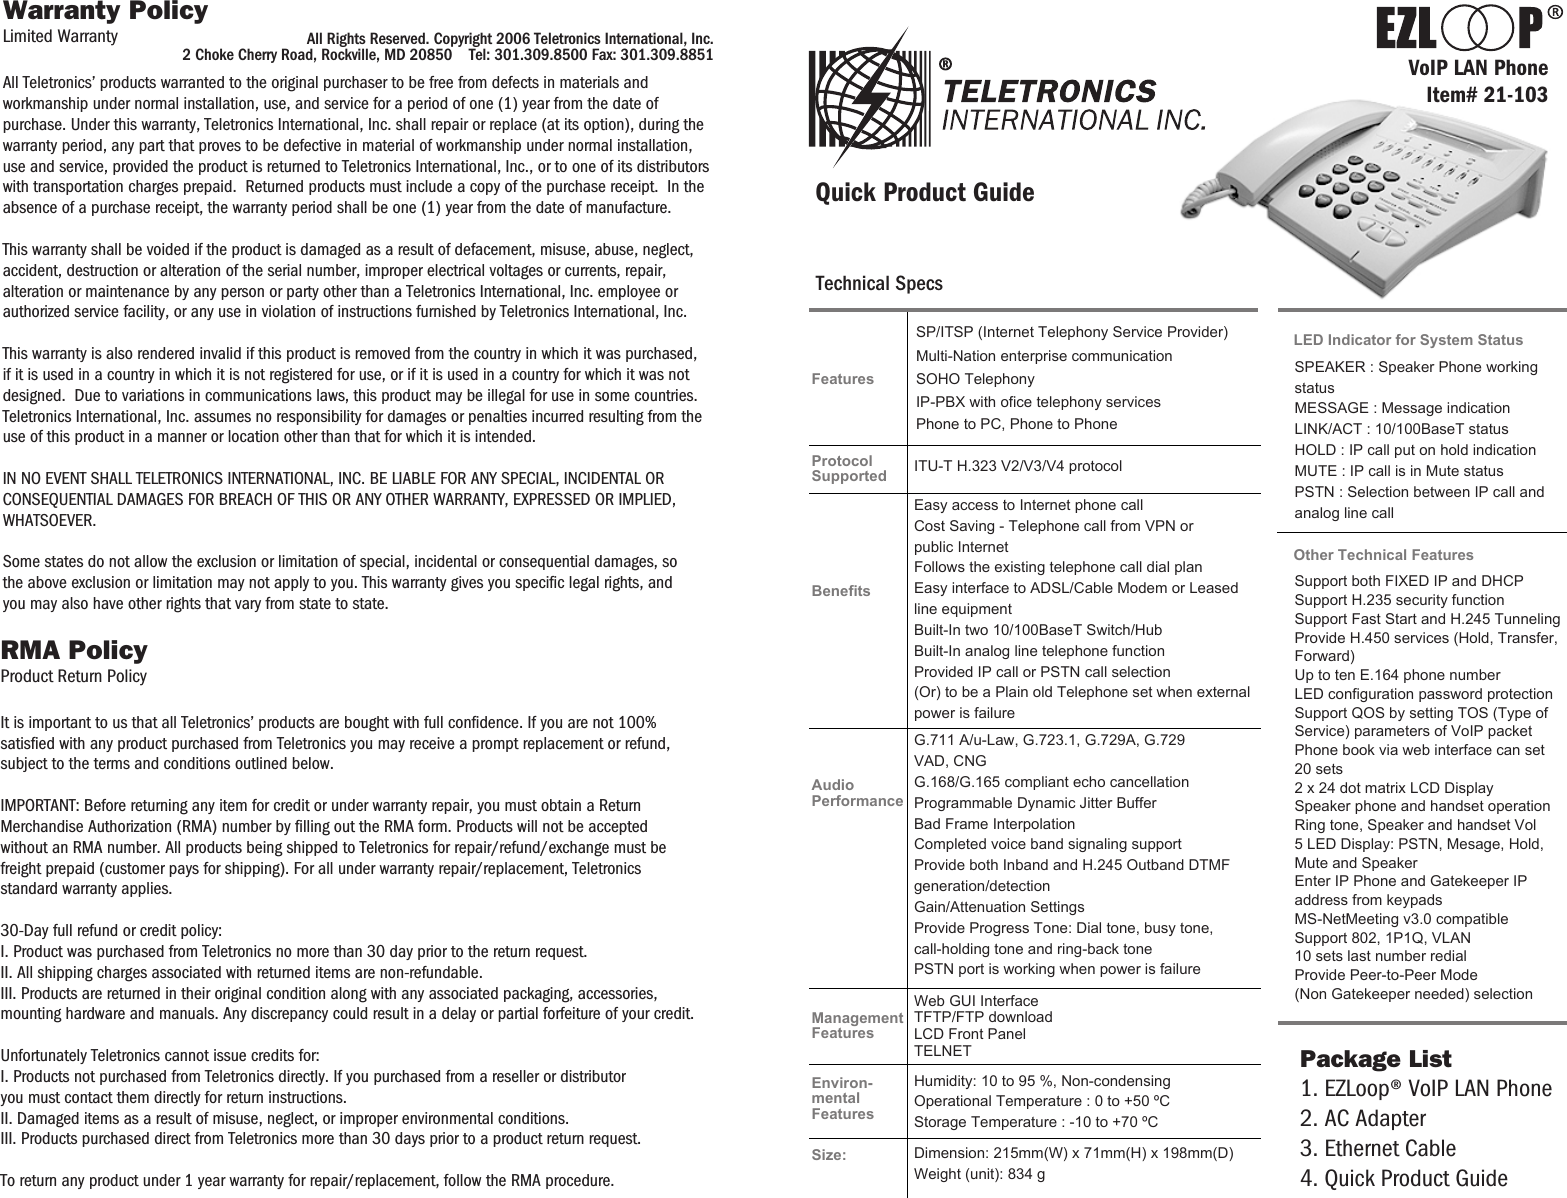 Page 1 of 2 - Voiplan1 Quick Guide LANPhone VOIPLANquickguide